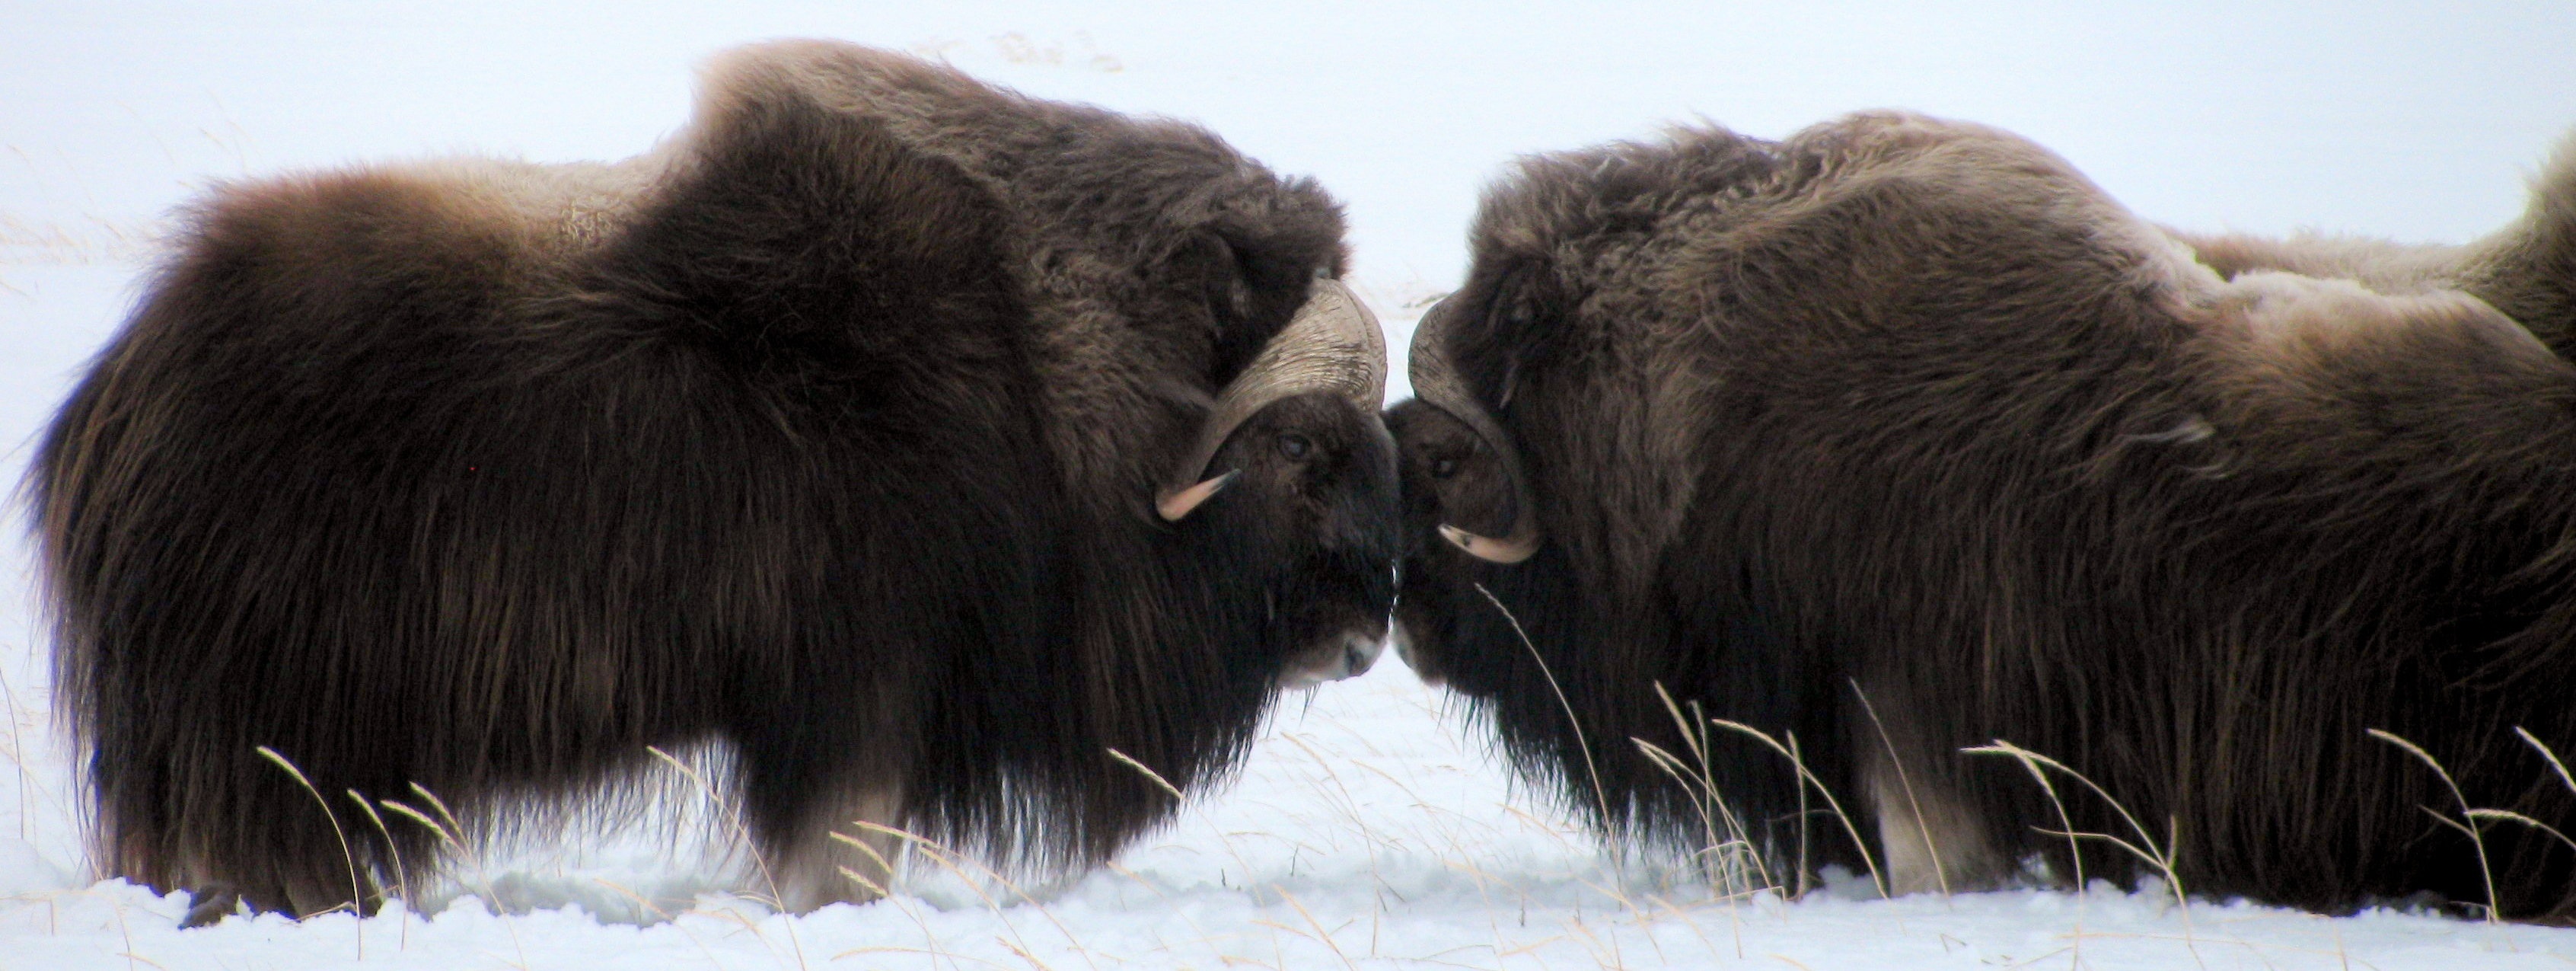 Two bull muskoxen face each other in the snow